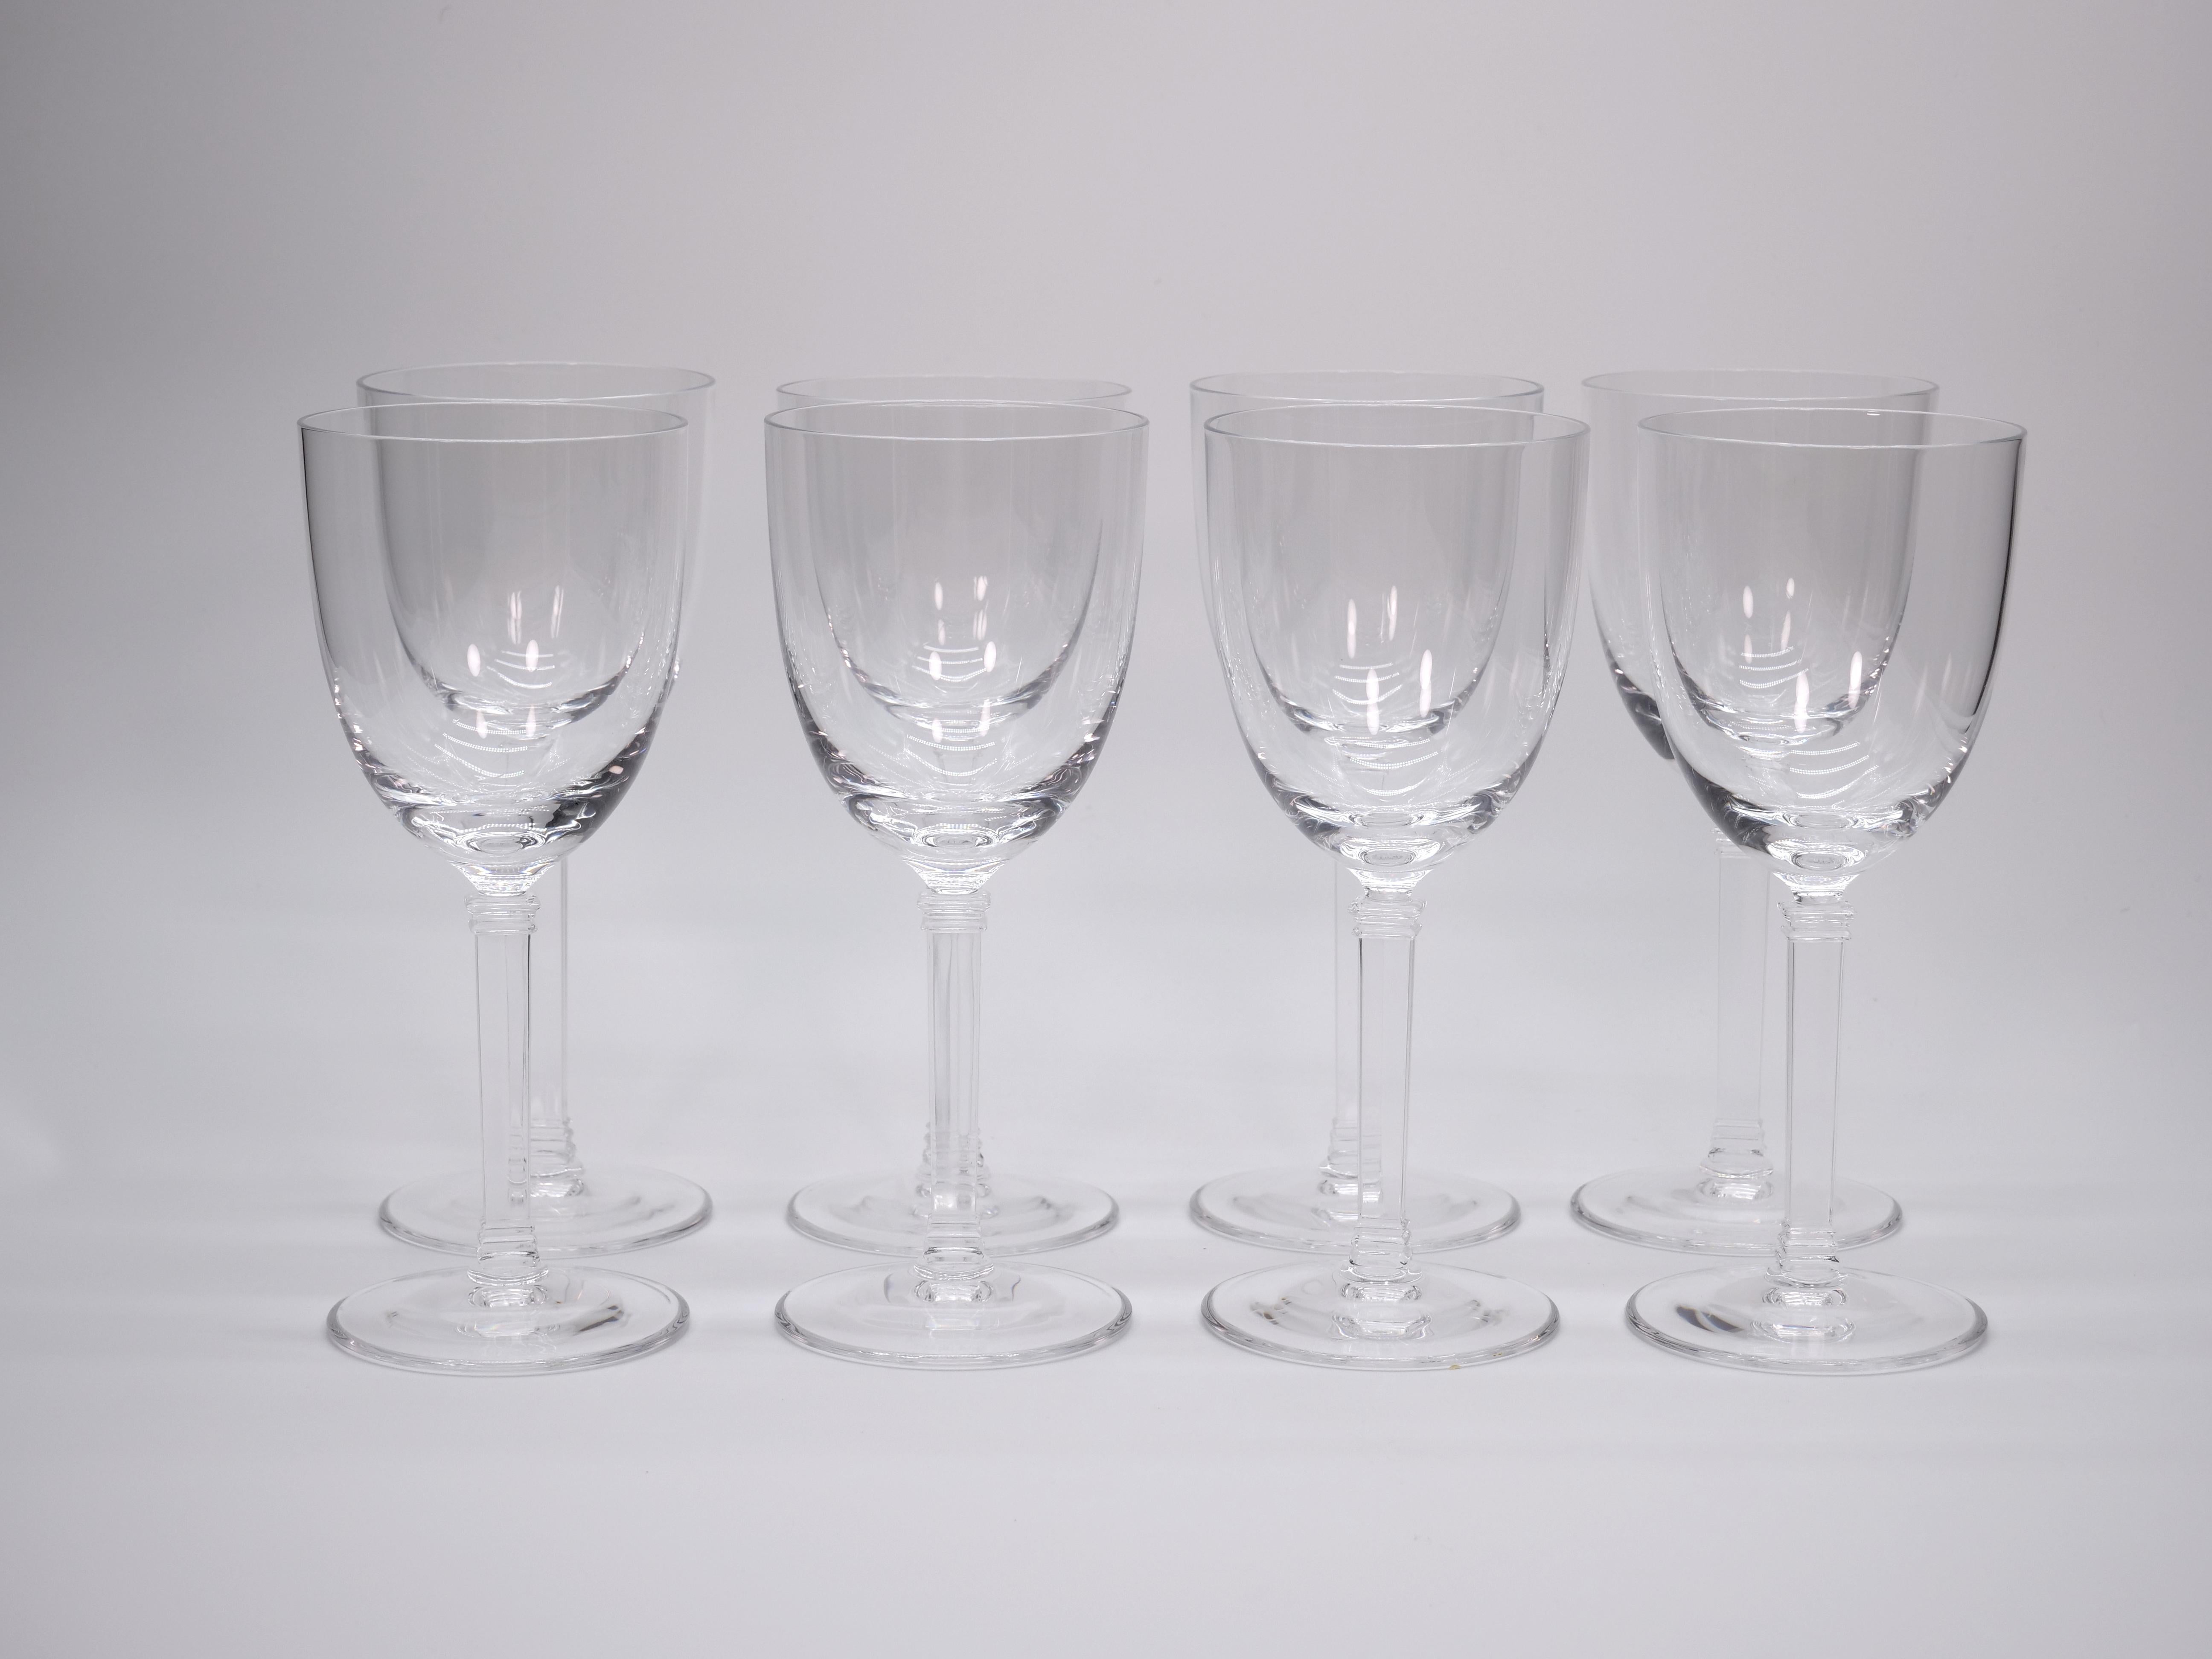 Exquisite Tiffany Crystal Mid-Century Modern barware, Tableware wine or water glass. We are selling individually. Each glass is $1400 per and we have fourteen pieces available. These glasses are very bold yet simple in an art deco style and can add